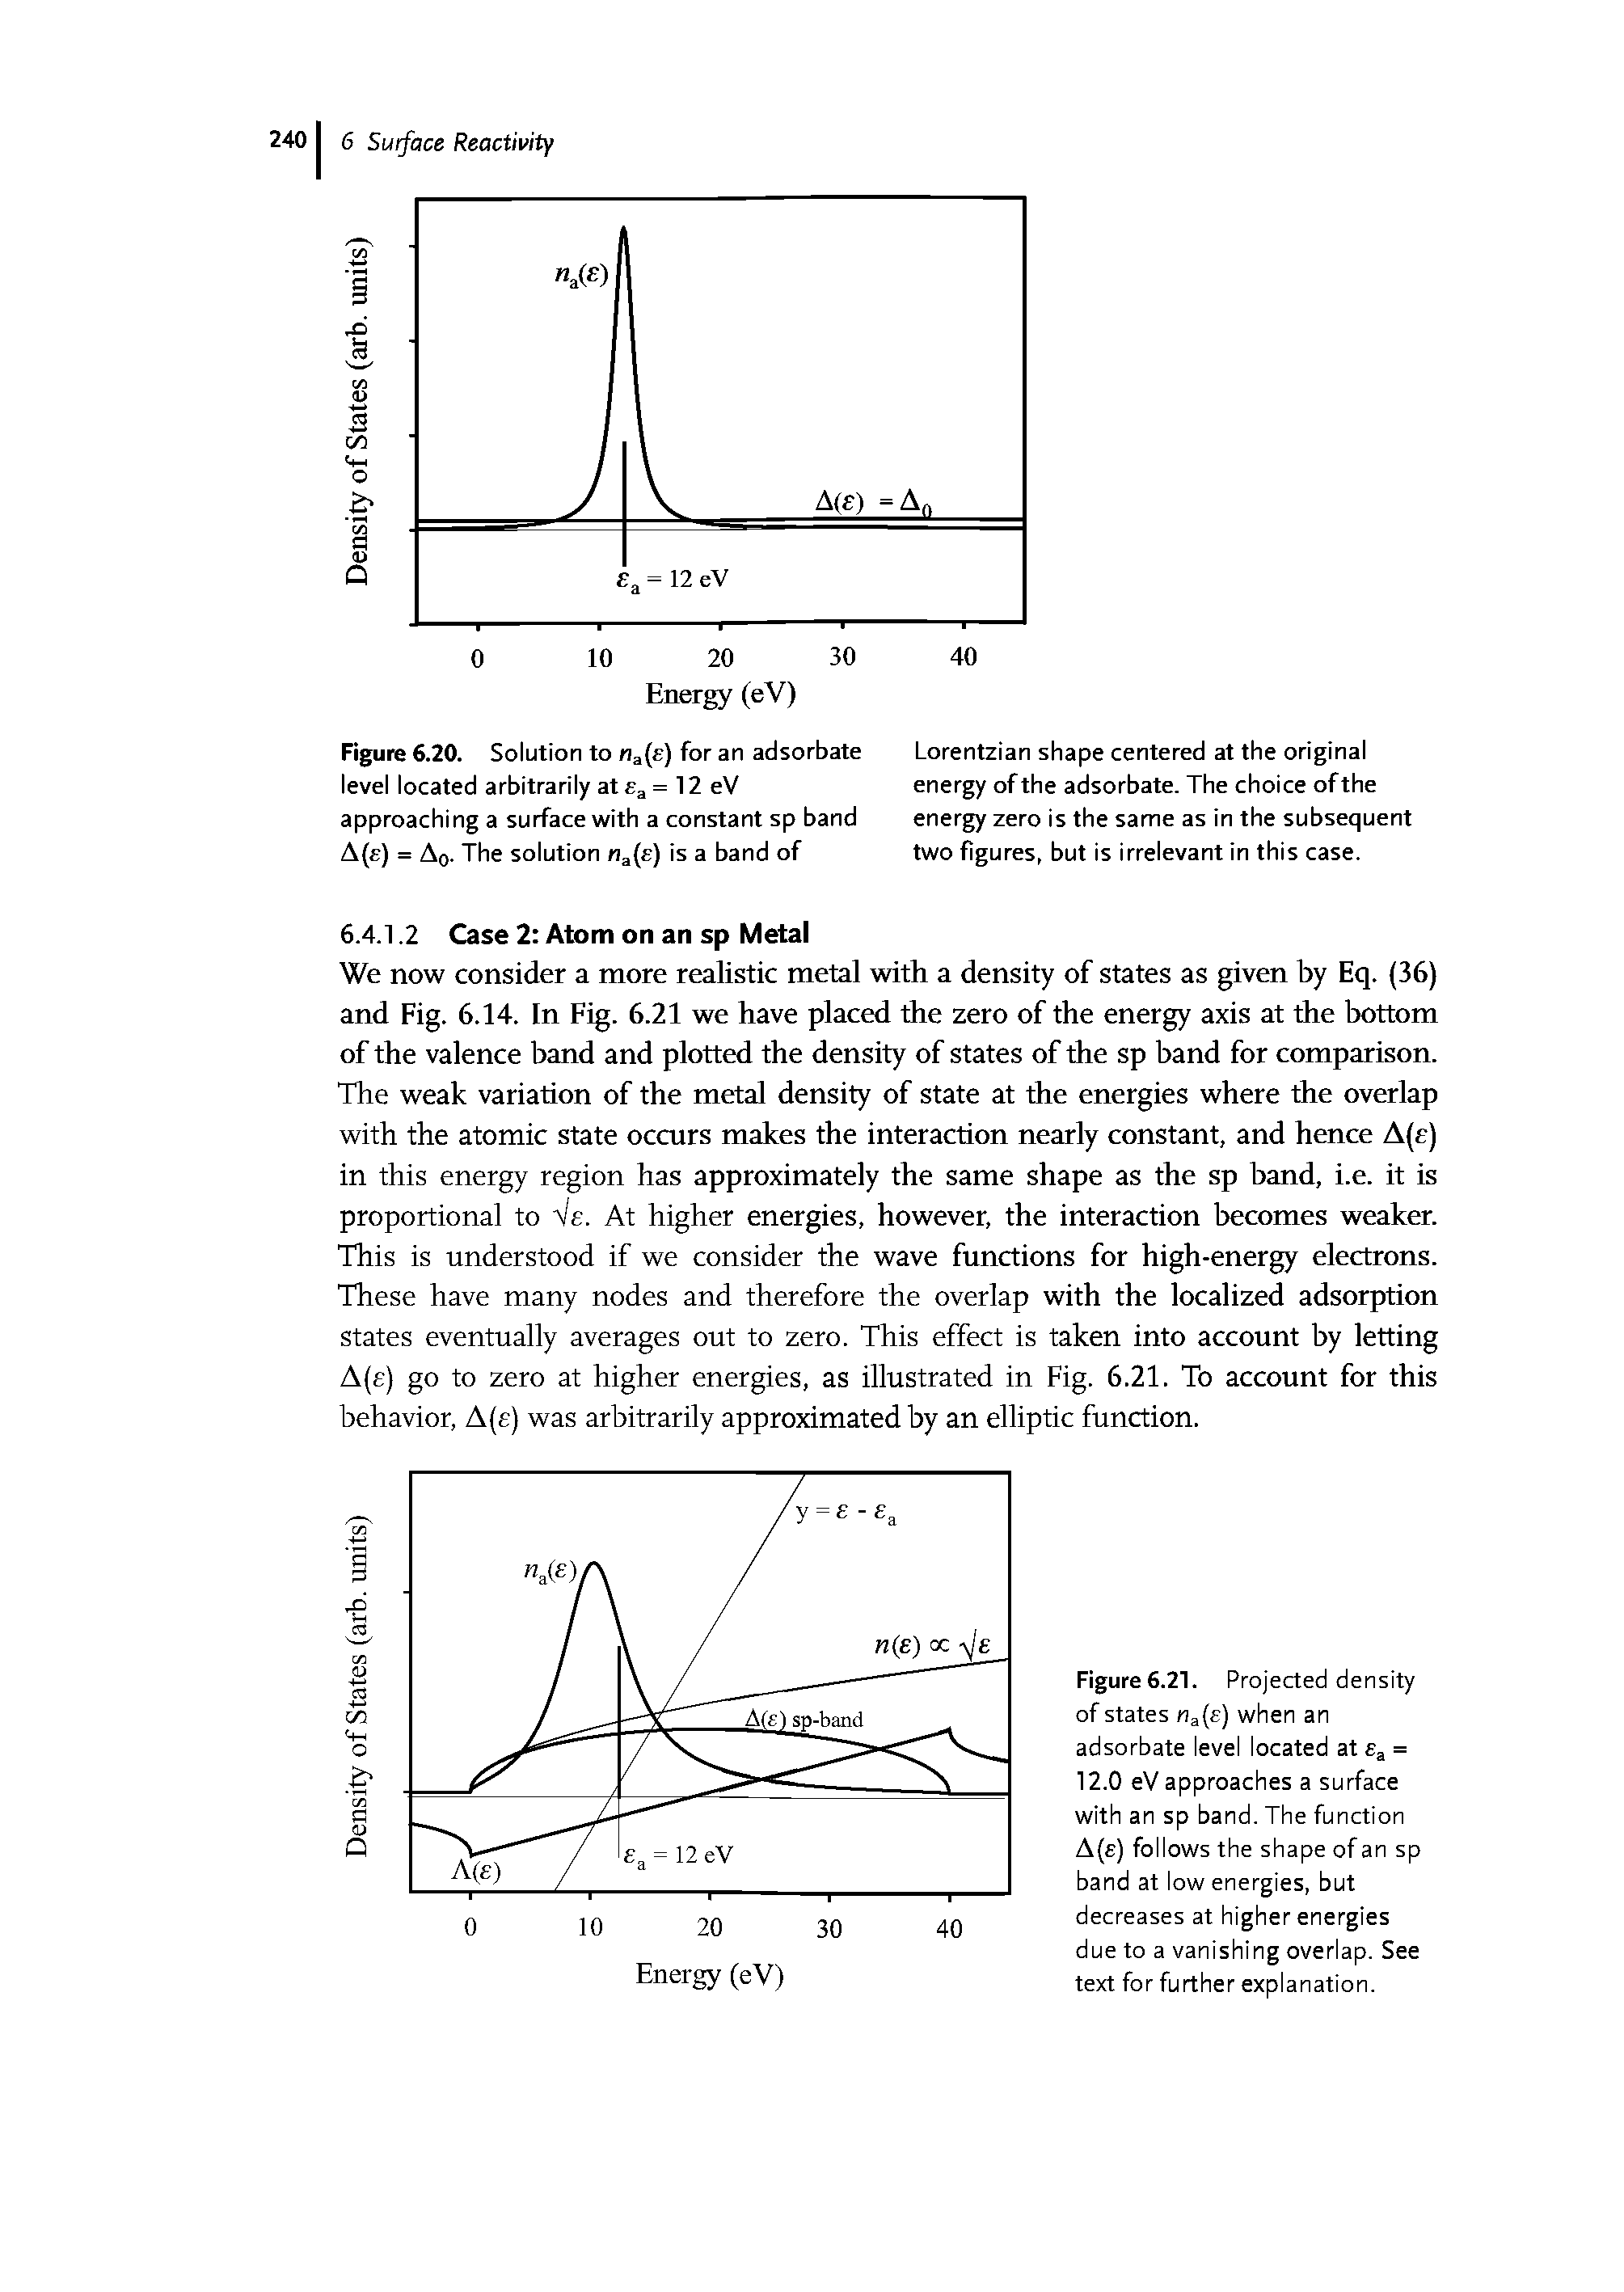 Figure 6.21. Projected density of states Ha( ) when an adsorbate level located at Eg = 12.0 eV approaches a surface with an sp band. The function A(e) follows the shape of an sp band at low energies, but decreases at higher energies due to a vanishing overlap. See text for further explanation.